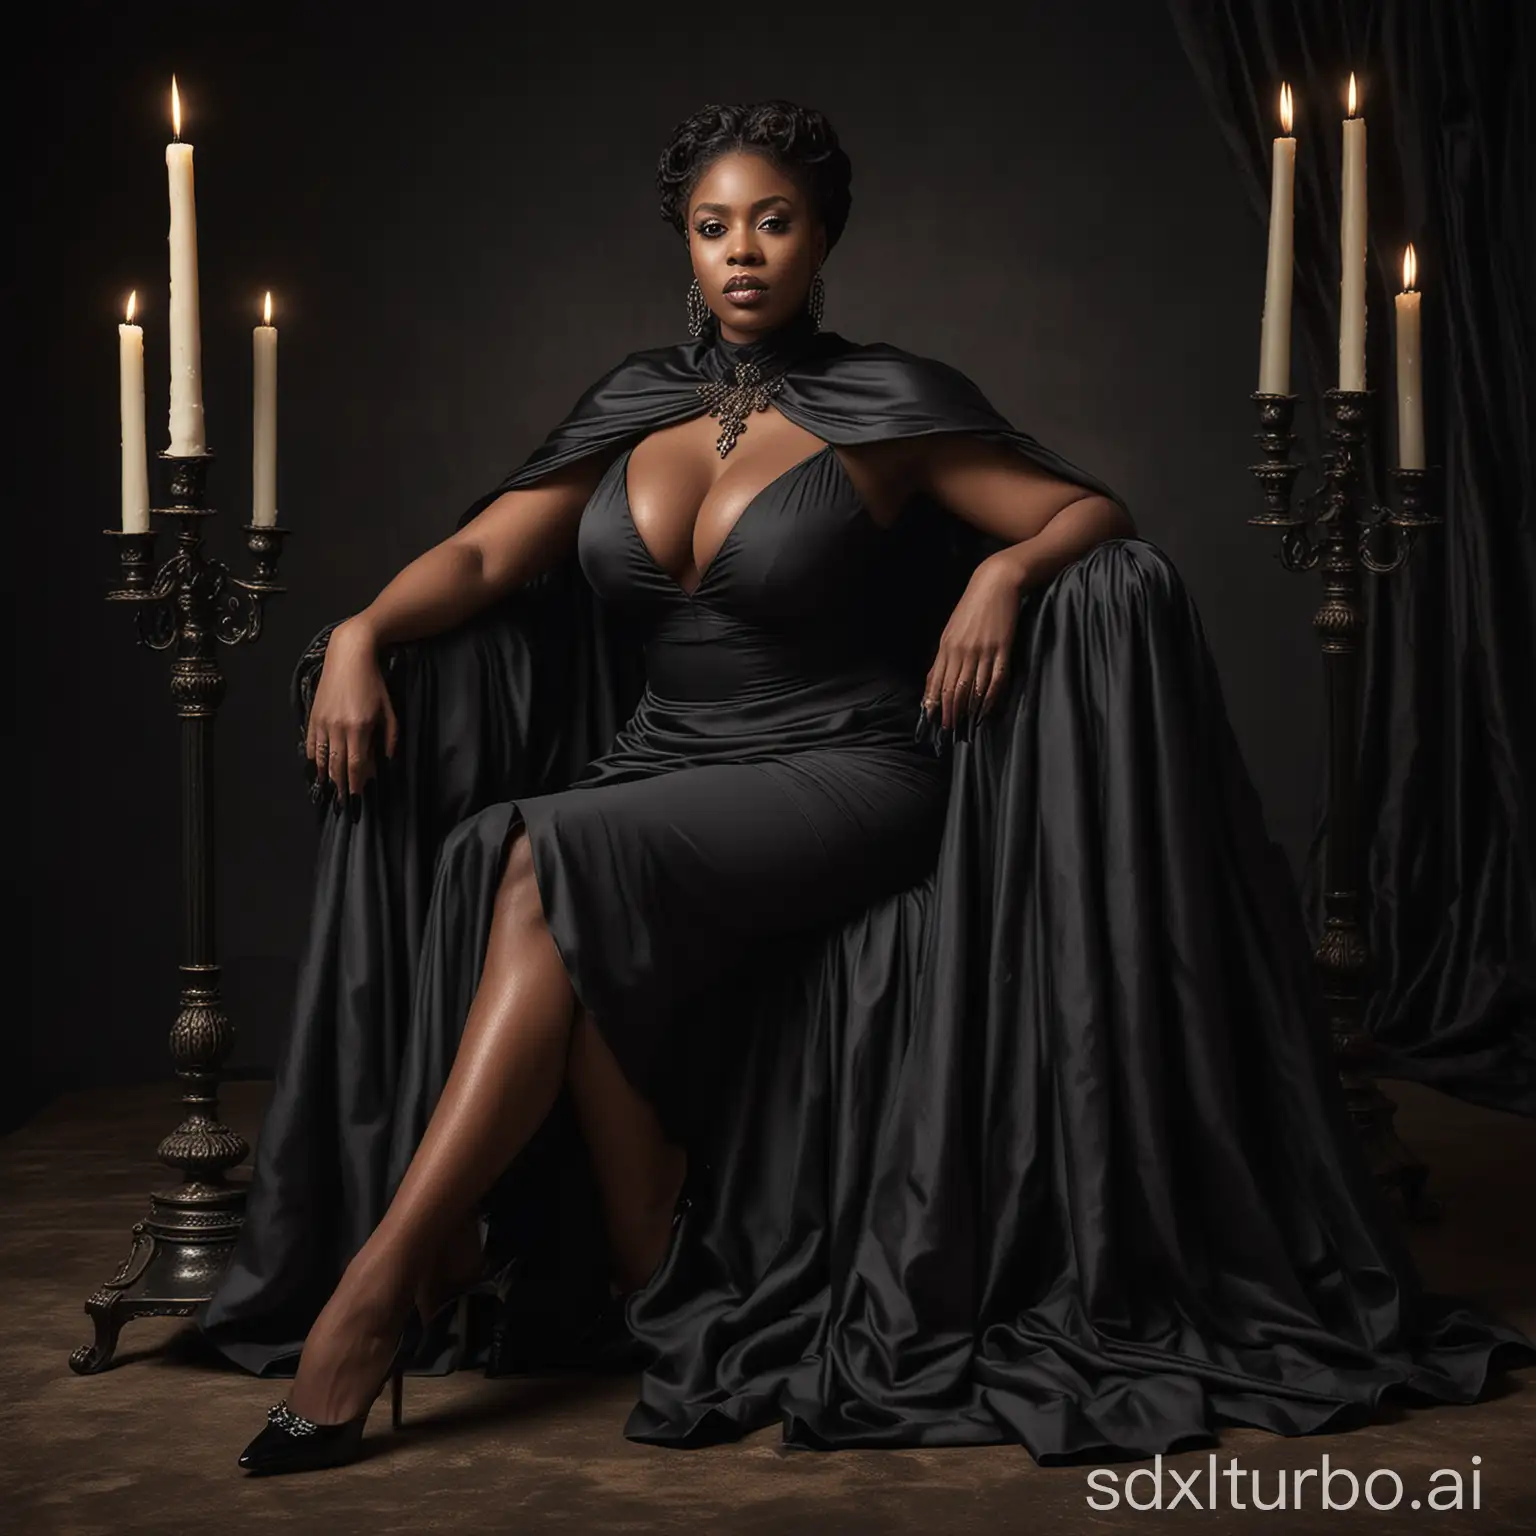 A stunning photograph of a powerful and majestic busty black woman sitting gracefully on a luxurious black throne. She exudes confidence and command, dressed in a mesmerizing black cape with a high collar, which drapes elegantly over her shoulders. Her sophisticated attire shows her exquisite taste and imposing presence. High heel shoes add a sensual touch to the scene, enhancing its balance and grace. A single candlestick adorned with black candles stands proudly beside her, casting a warm, inviting glow that envelopes the scene with an air of mystery and strength. This captivating image is a bold statement of power, confidence and beauty, leaving a lasting impression on all who behold it.